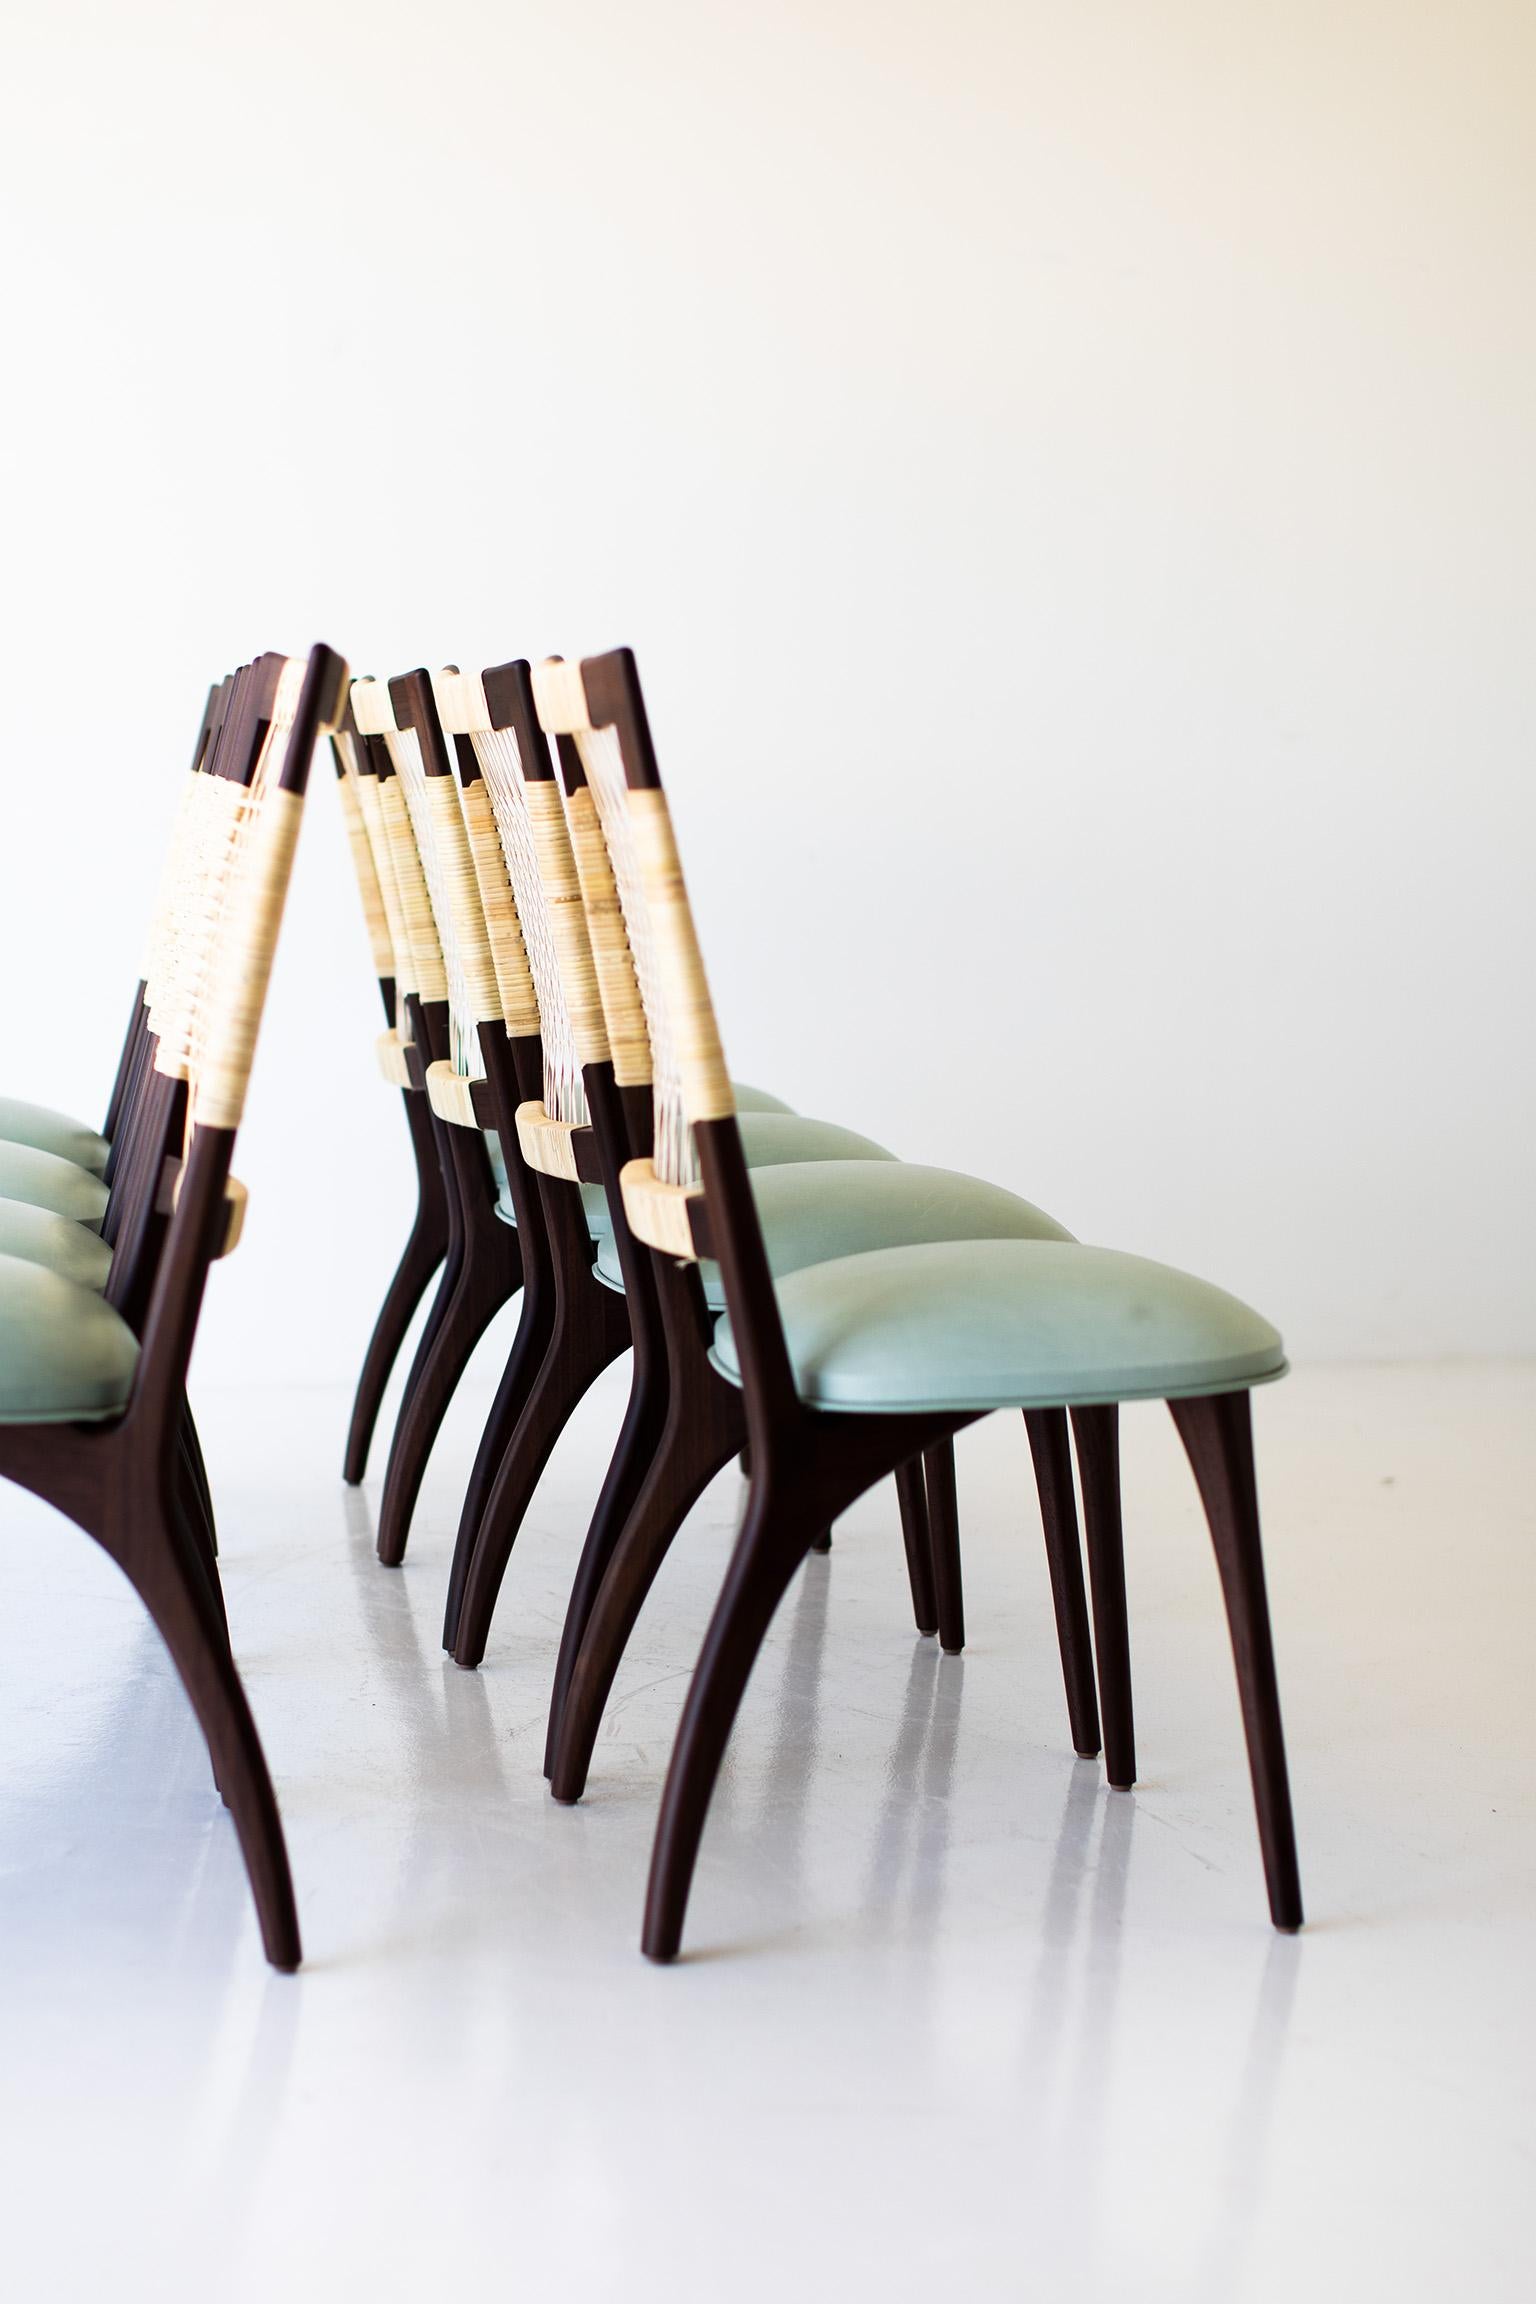 Craft caned dining chairs, bonnie caned dining chairs, leather and walnut

Designer: Laura Trenchard
Manufacturer: Craft Associates Furniture
Period/model: Mid-Century Modern
Specs: solid walnut, leather, cane


Modern 